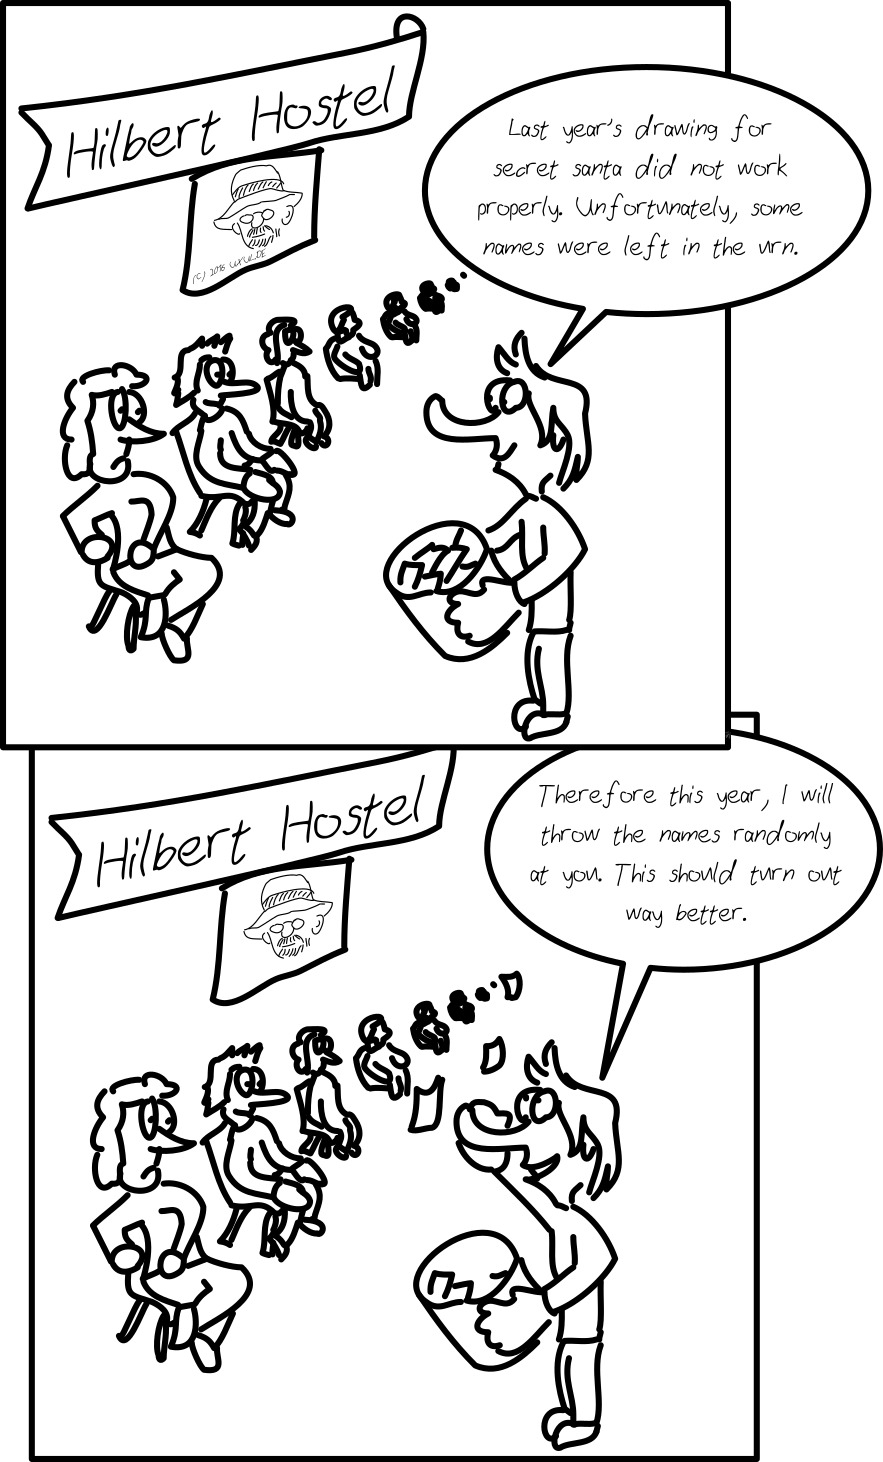 Panel 1: A long (infinite) row of children sitting on chairs is shown. Behind them, a tag "Hilbert Hostel", below this tag, an image of David Hilbert. Before them stands a person with an urn filled with paper slips. The person says: "Last year's drawing for secret santa did not work properly. Unfortunately, some names were left in the urn." -- Panel 2: The person says "Therefore this year, I will throw the names randomly at you. This should turn out way better." and throws the slips with names at the row. -- Frperg Cnary: Bar crefba va gur ebj fnlf gung ur qerj uvf bja anzr. Gur crefba fnlf QNZA!